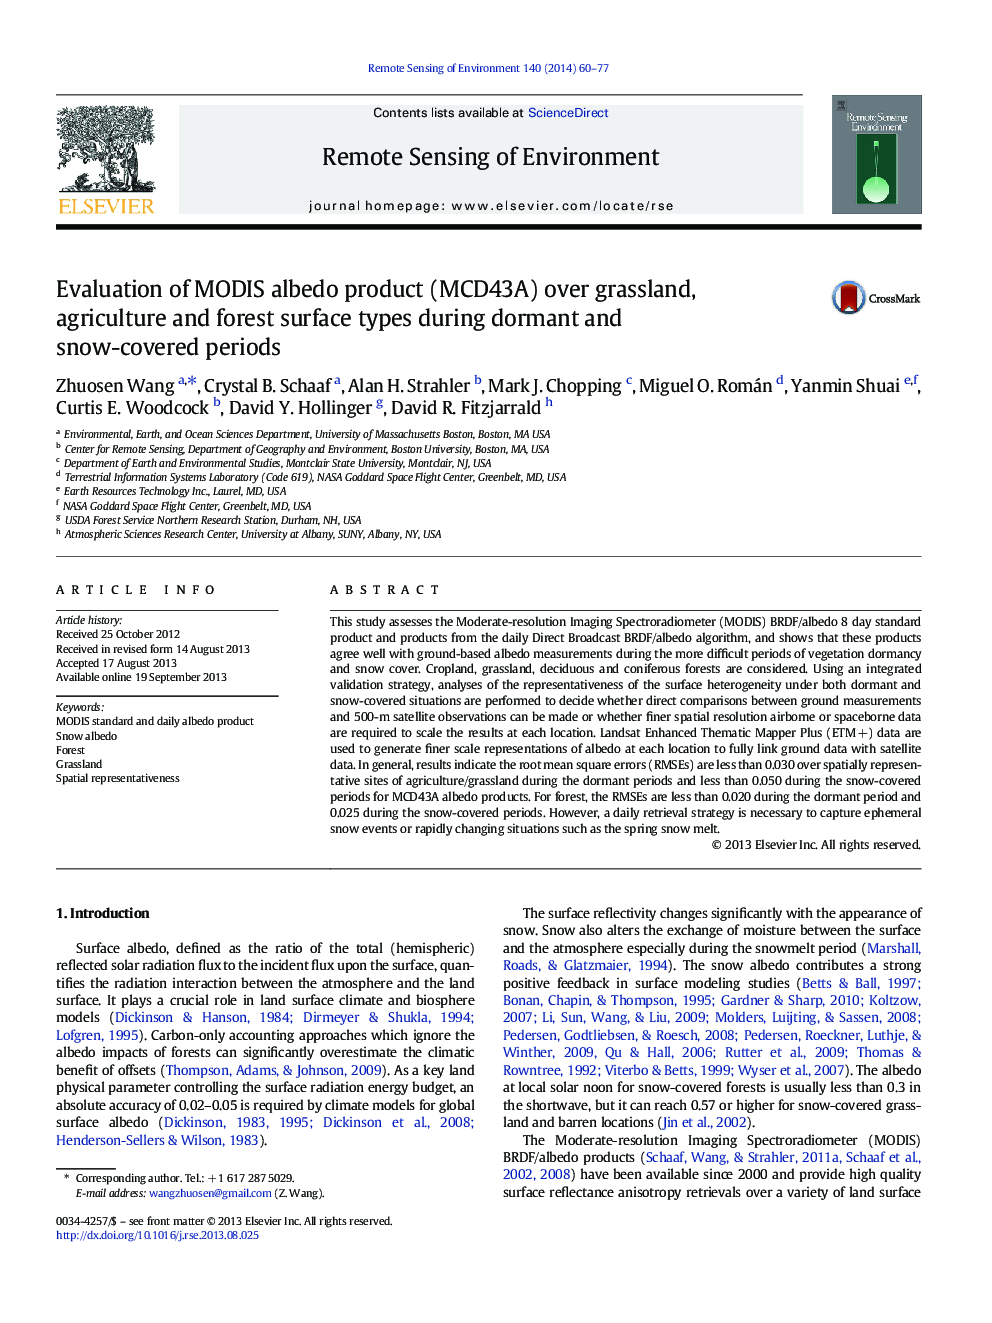 Evaluation of MODIS albedo product (MCD43A) over grassland, agriculture and forest surface types during dormant and snow-covered periods